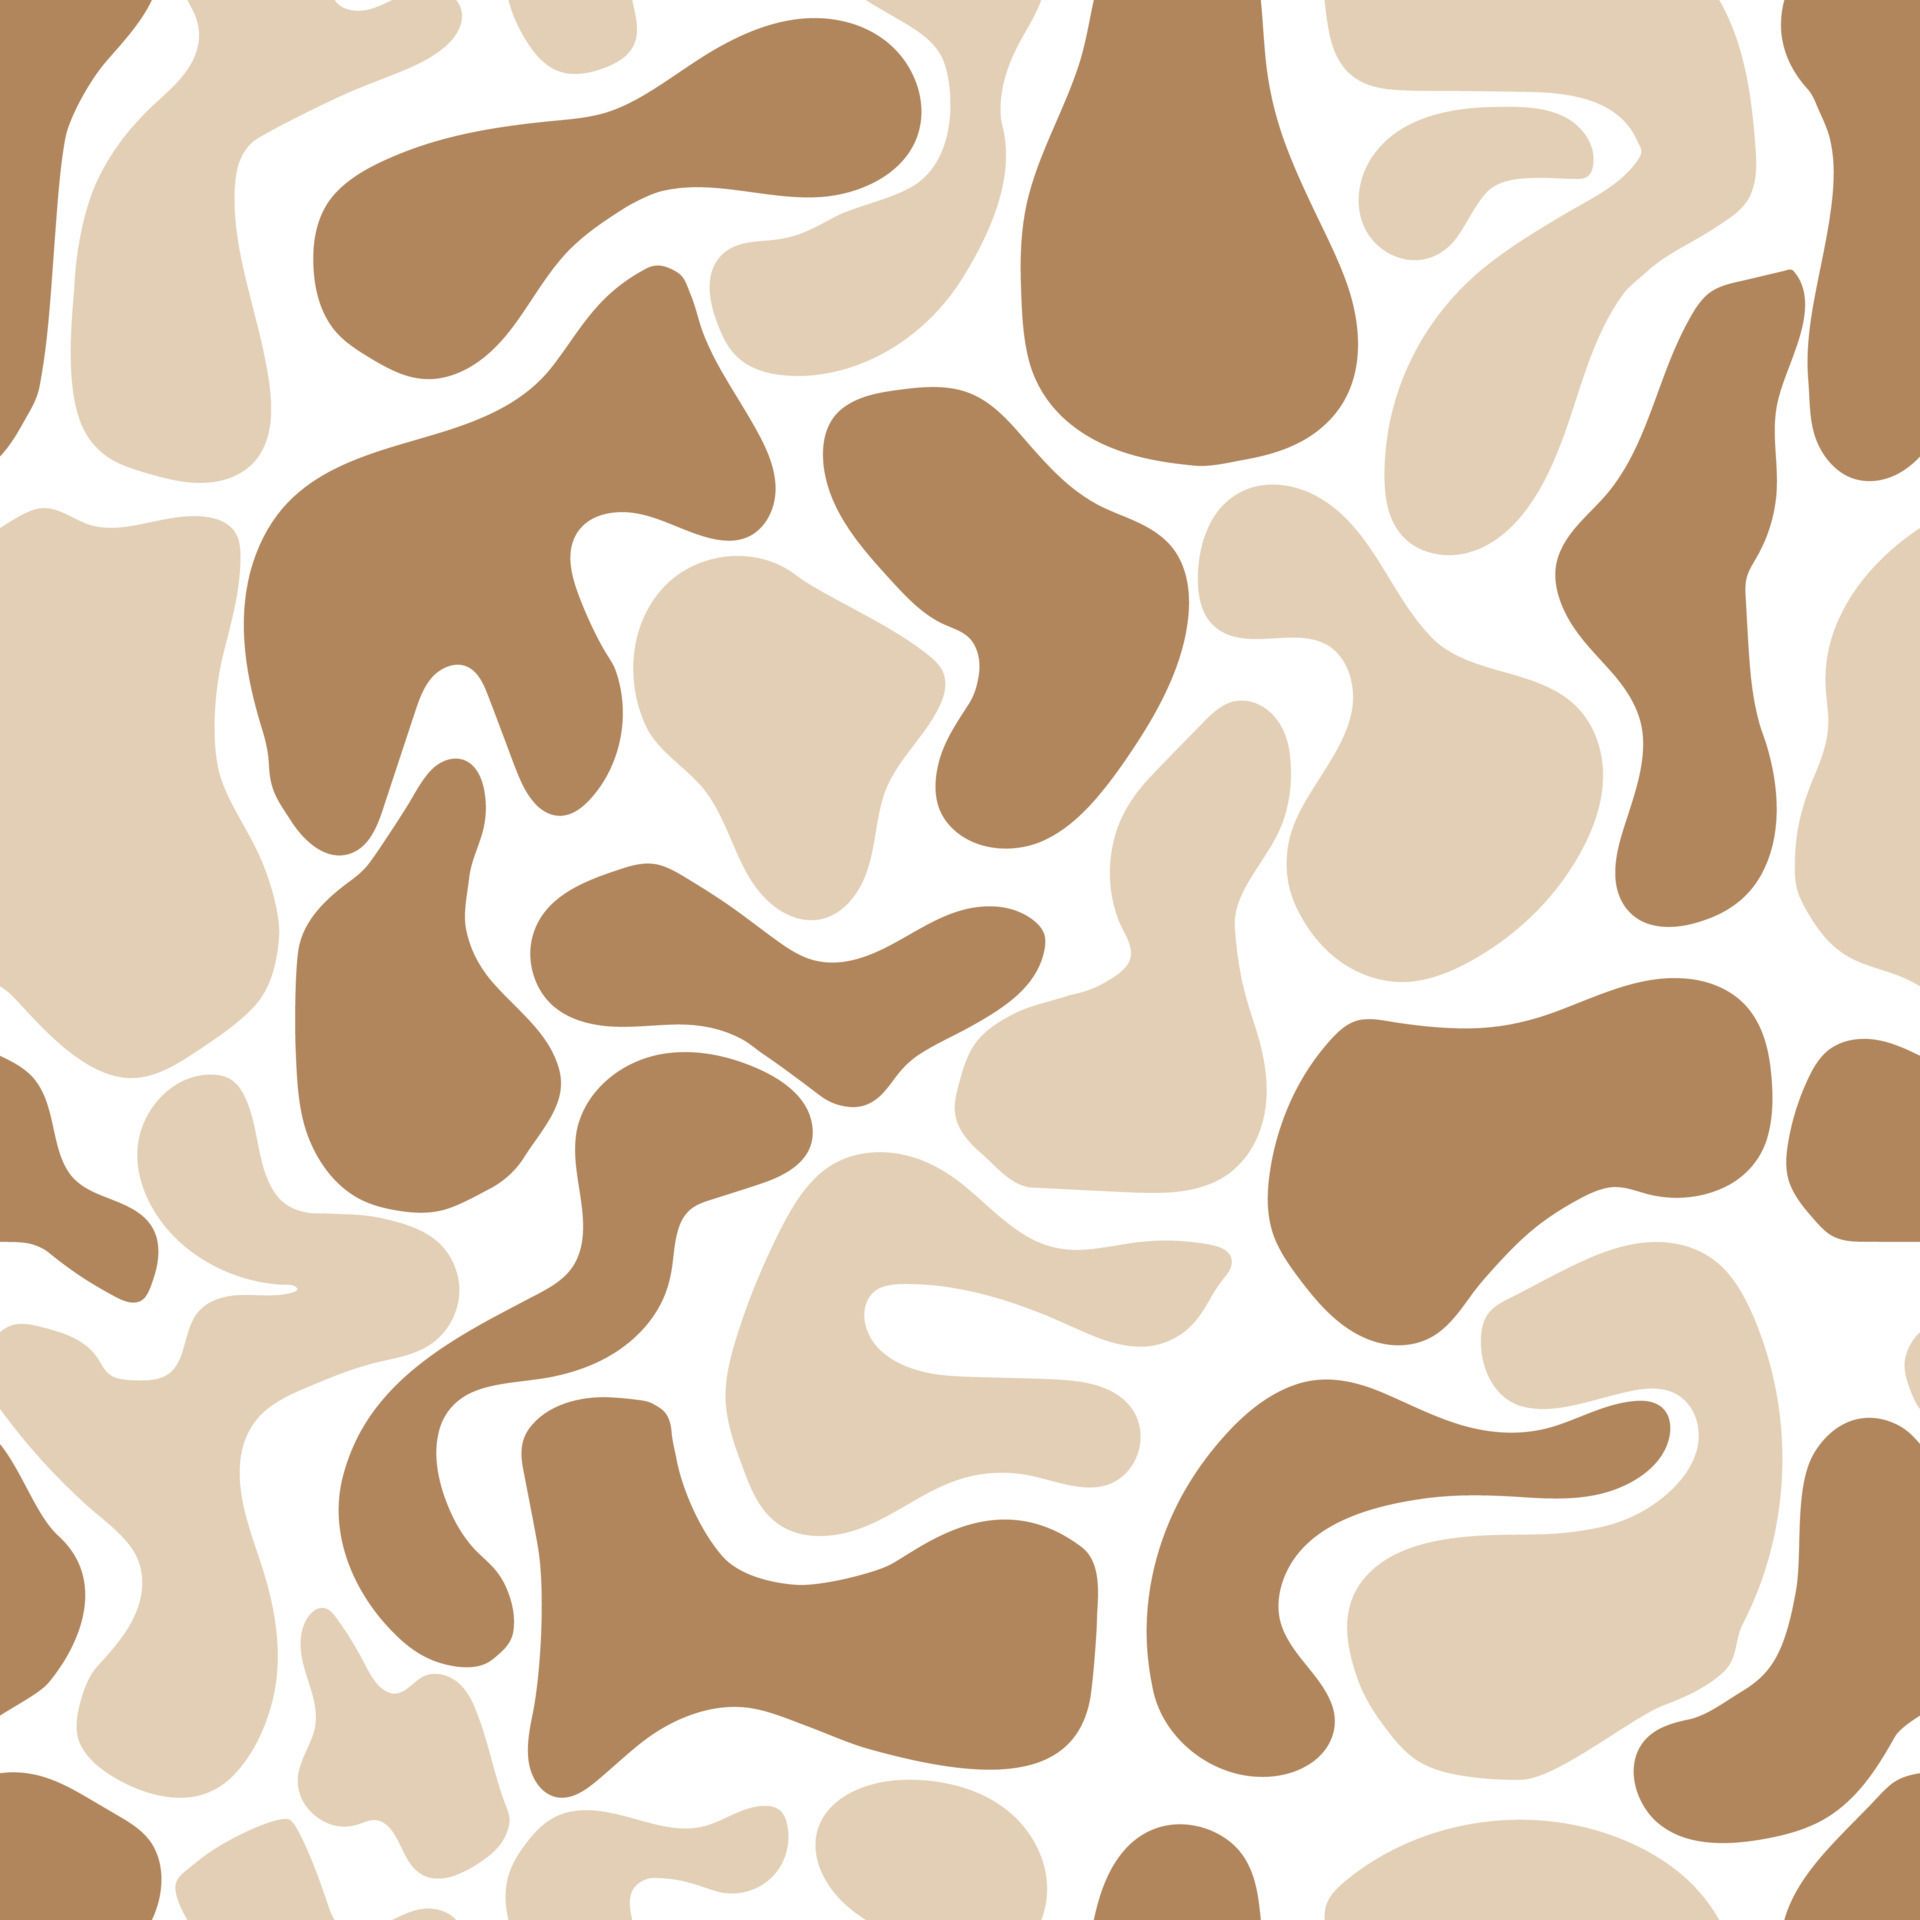 Camouflage pattern in brown and beige - Leopard